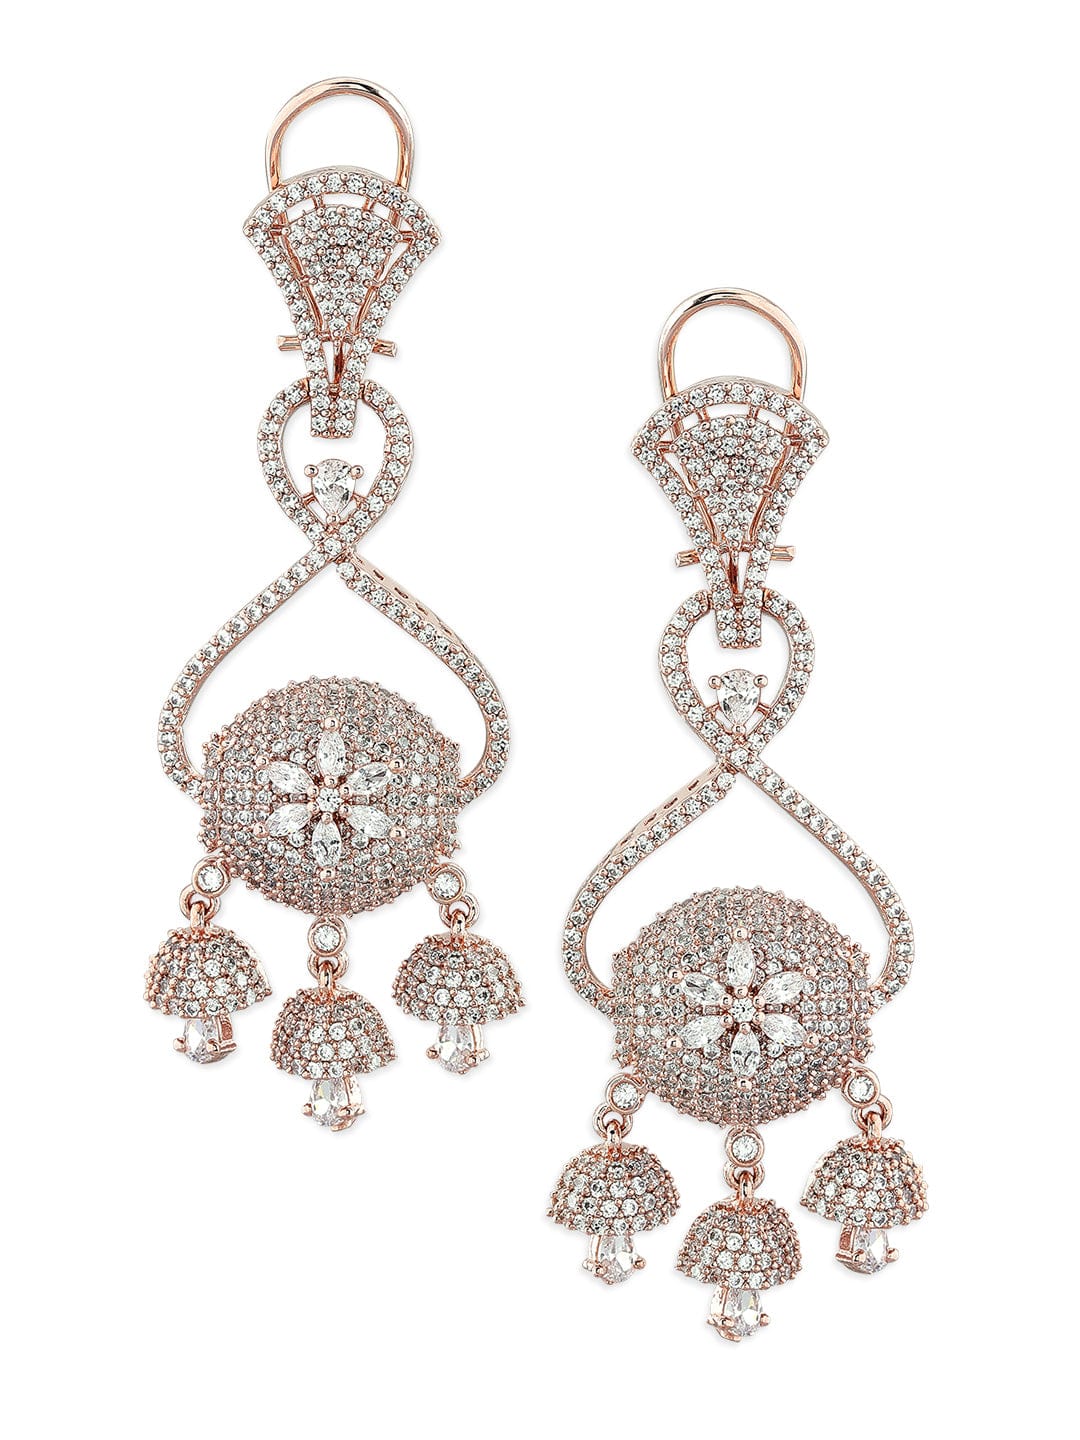 G'orgeous Allure Gold Drop Earrings